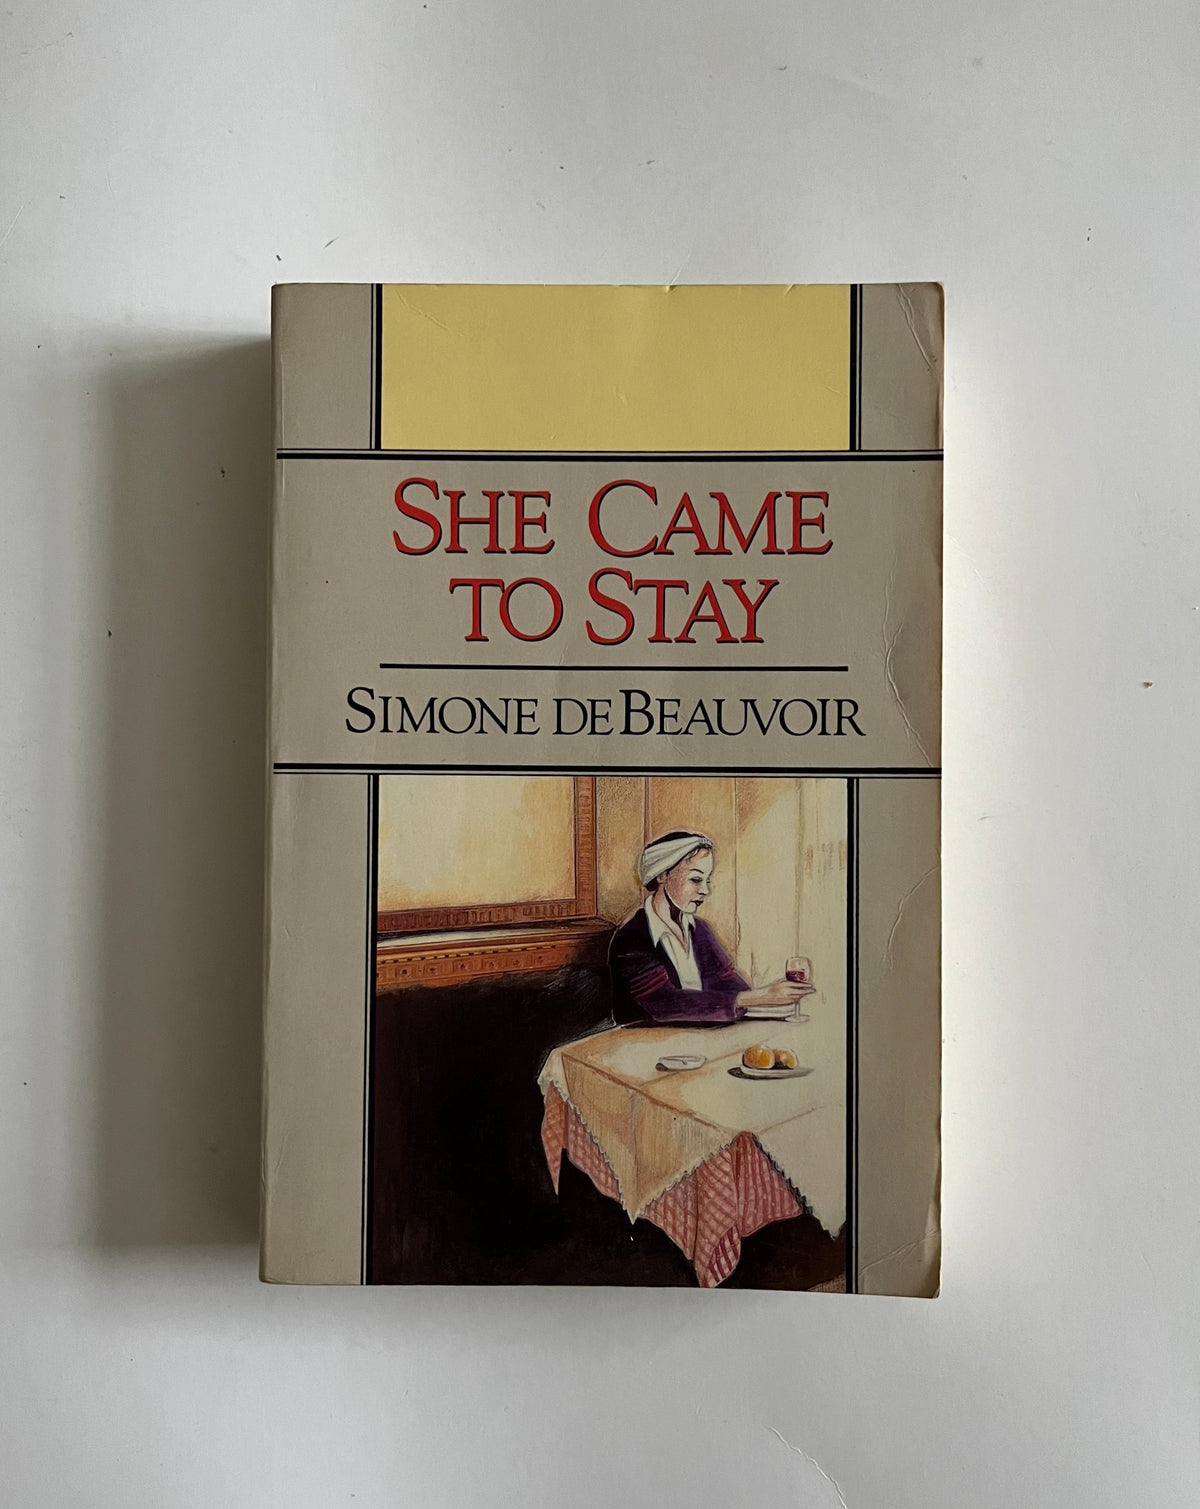 She Came to Stay by Simone de Beauvoir